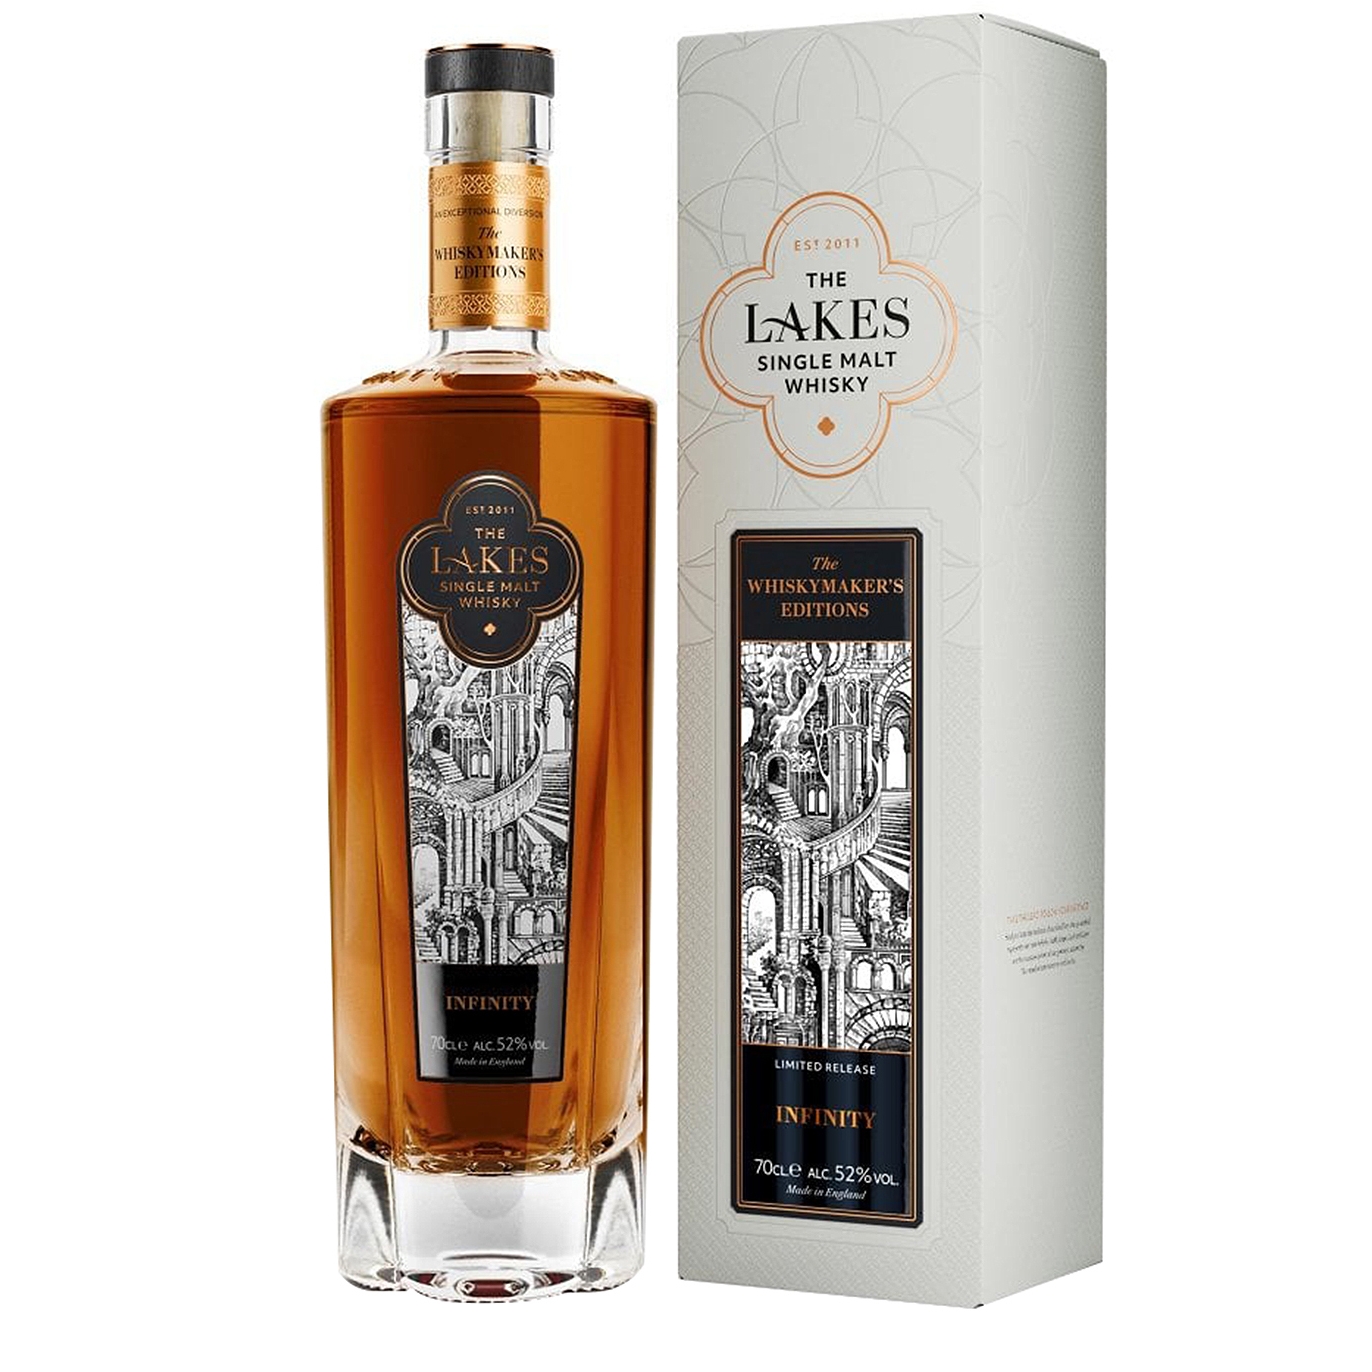 The Lakes Distillery Infinity The Whiskymaker's Editions Single Malt Whisky